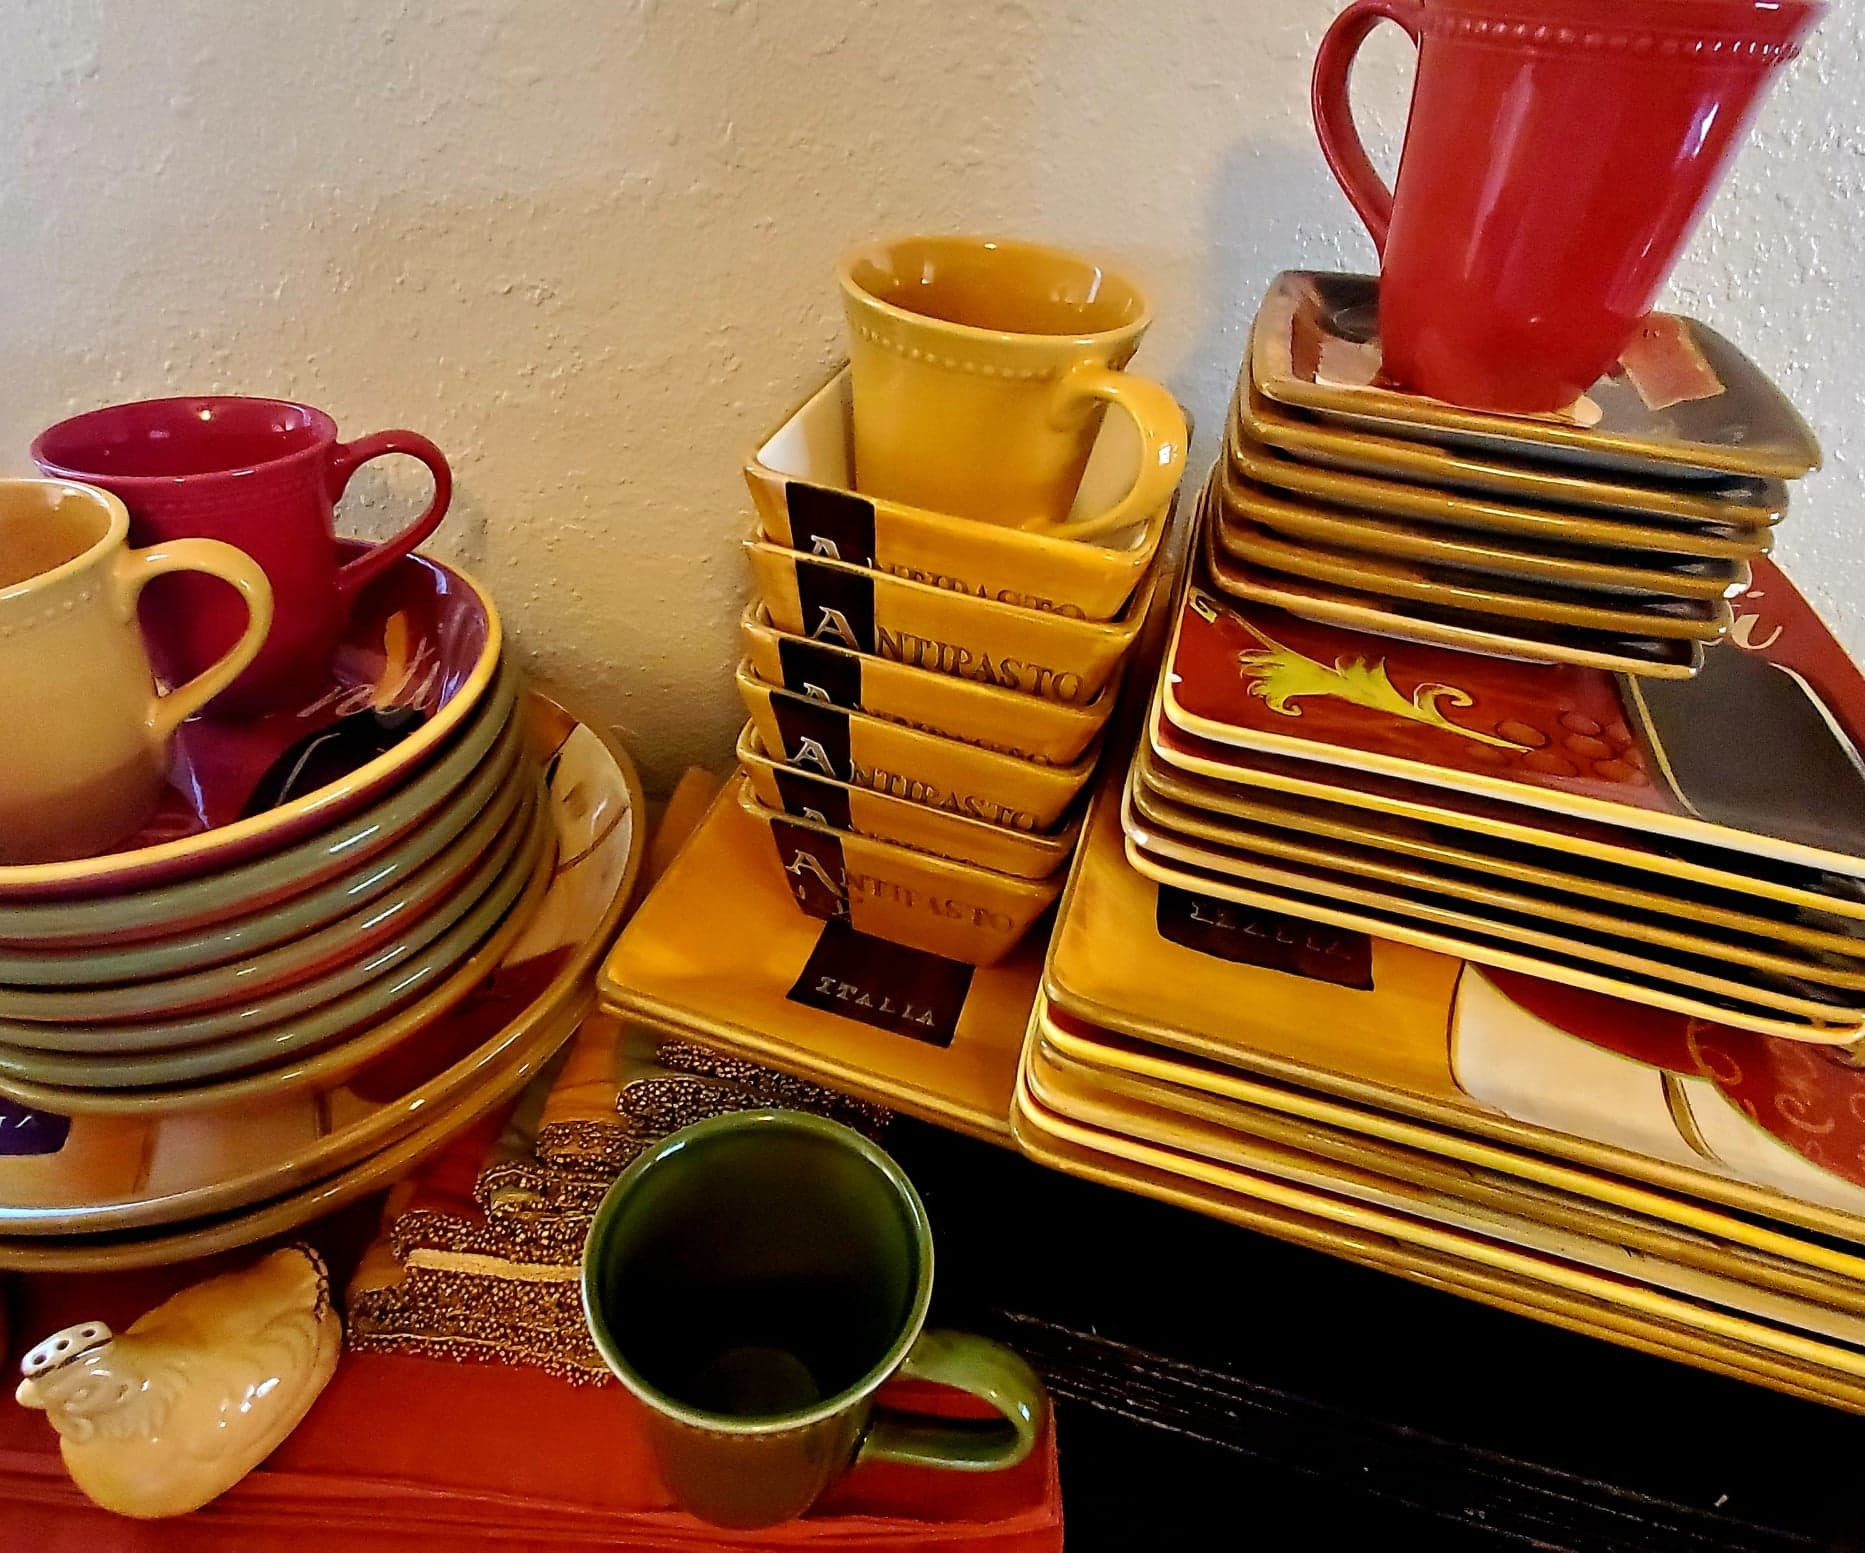 Full Tuscan-style dinnerware set from Pier 1 Imports in the Cucina pattern with rich browns, reds, oranges and gold colors. Includes 6 of each items coffee mugs, salad bowls, pasta bowls, dinner plates and matching chargers, appetizer plates, dessert plates, 6 napkins, 6 place-mats, 1 set of salt and pepper shakers, 2 large serving platters and 2 large serving bowls. Note: not all items are pictured.